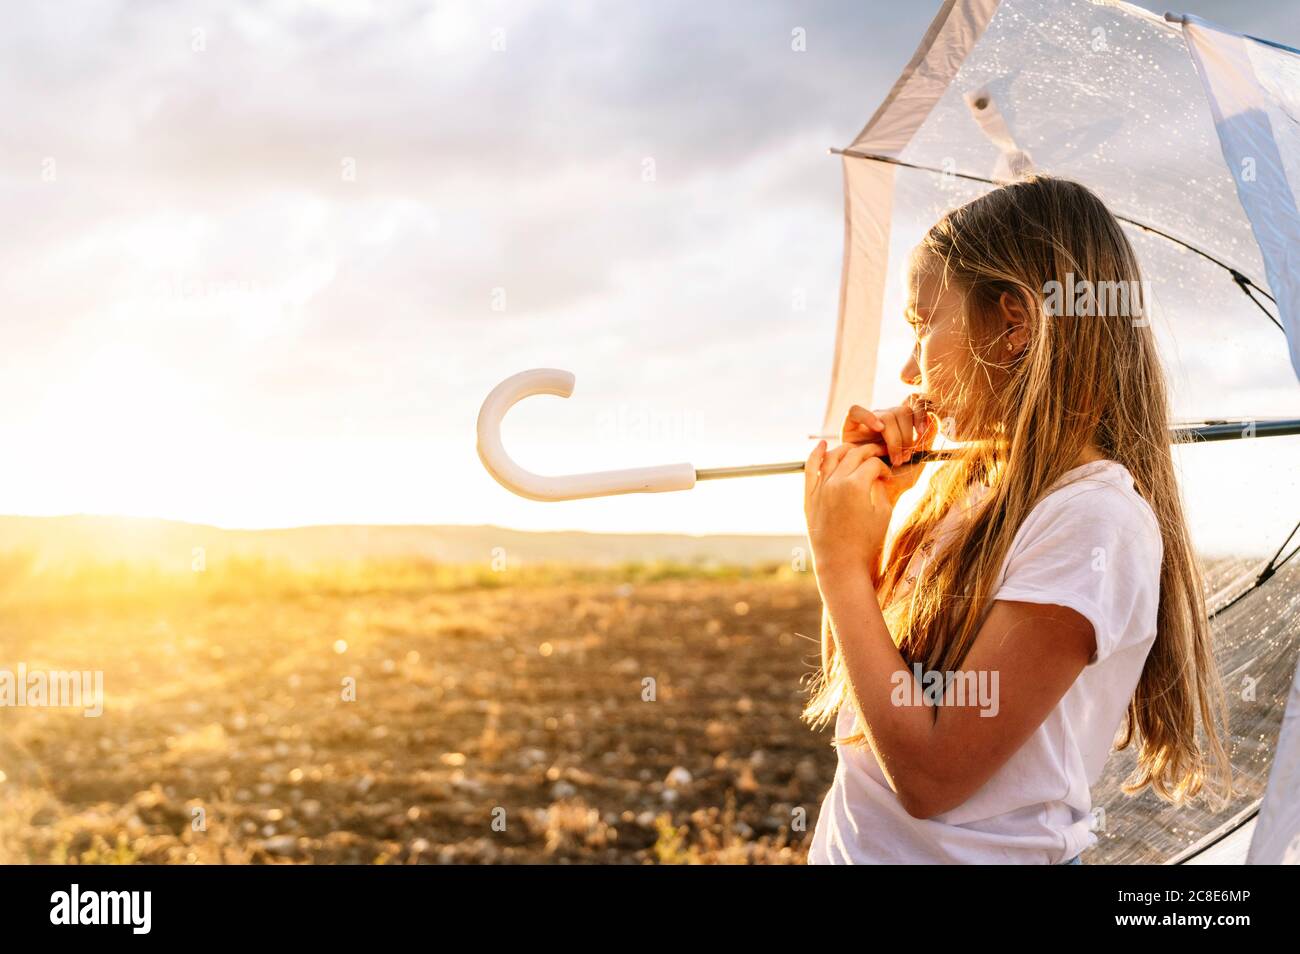 Girl with long blond hair holding umbrella while looking away during sunset Stock Photo